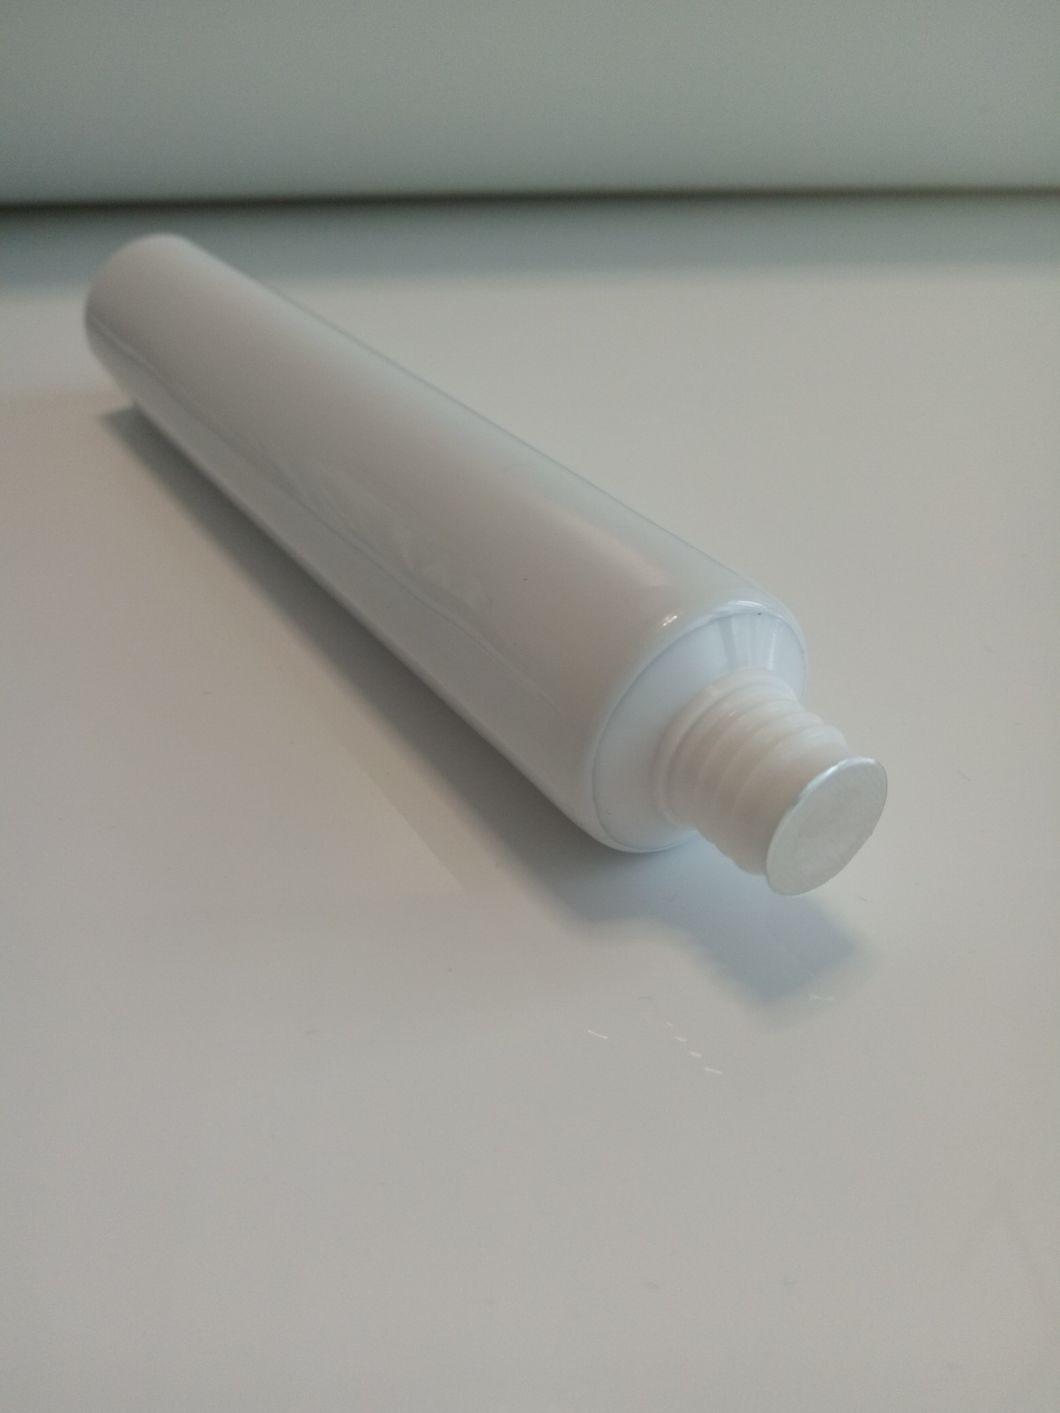 Aluminum Barrier Laminated Tubes Abl Tubes Used for Pharmaceutical, Food, and Cosmetic Products